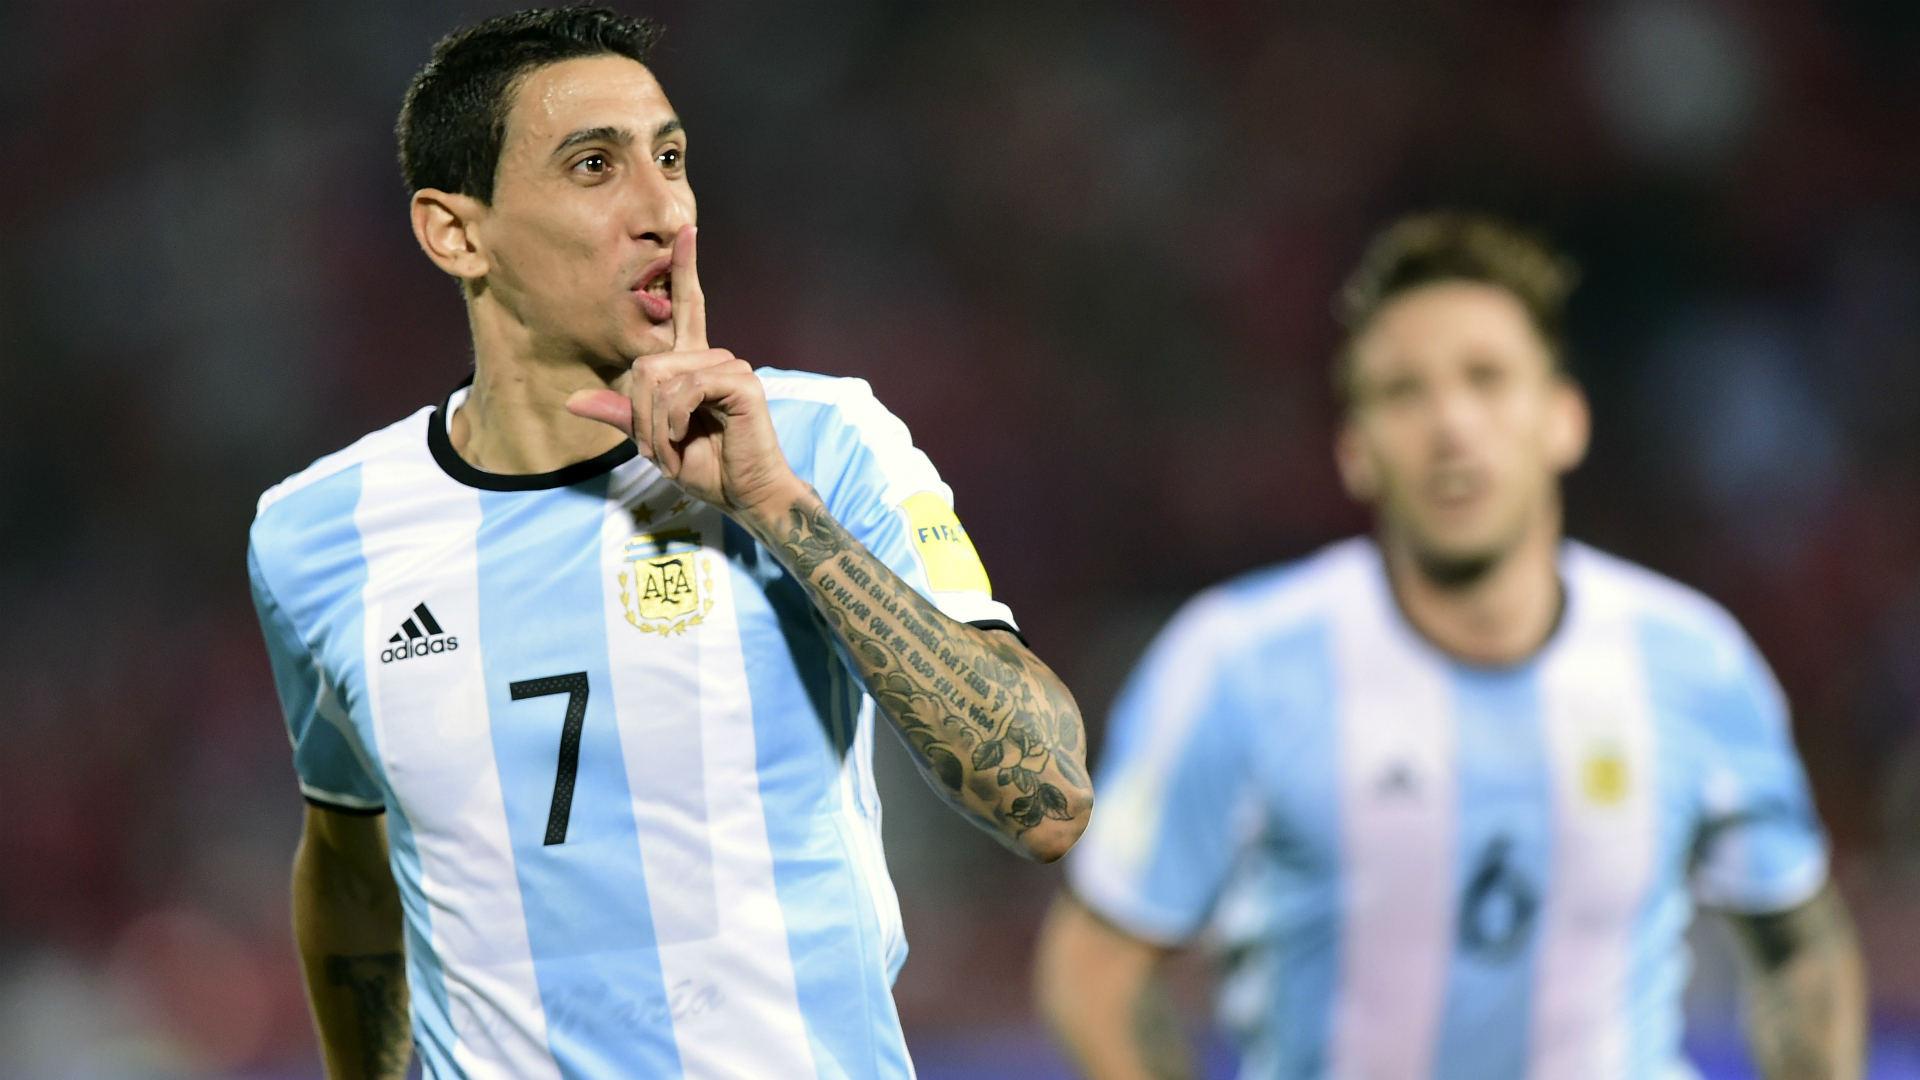 Di Maria hoping it's third time lucky for Argentina